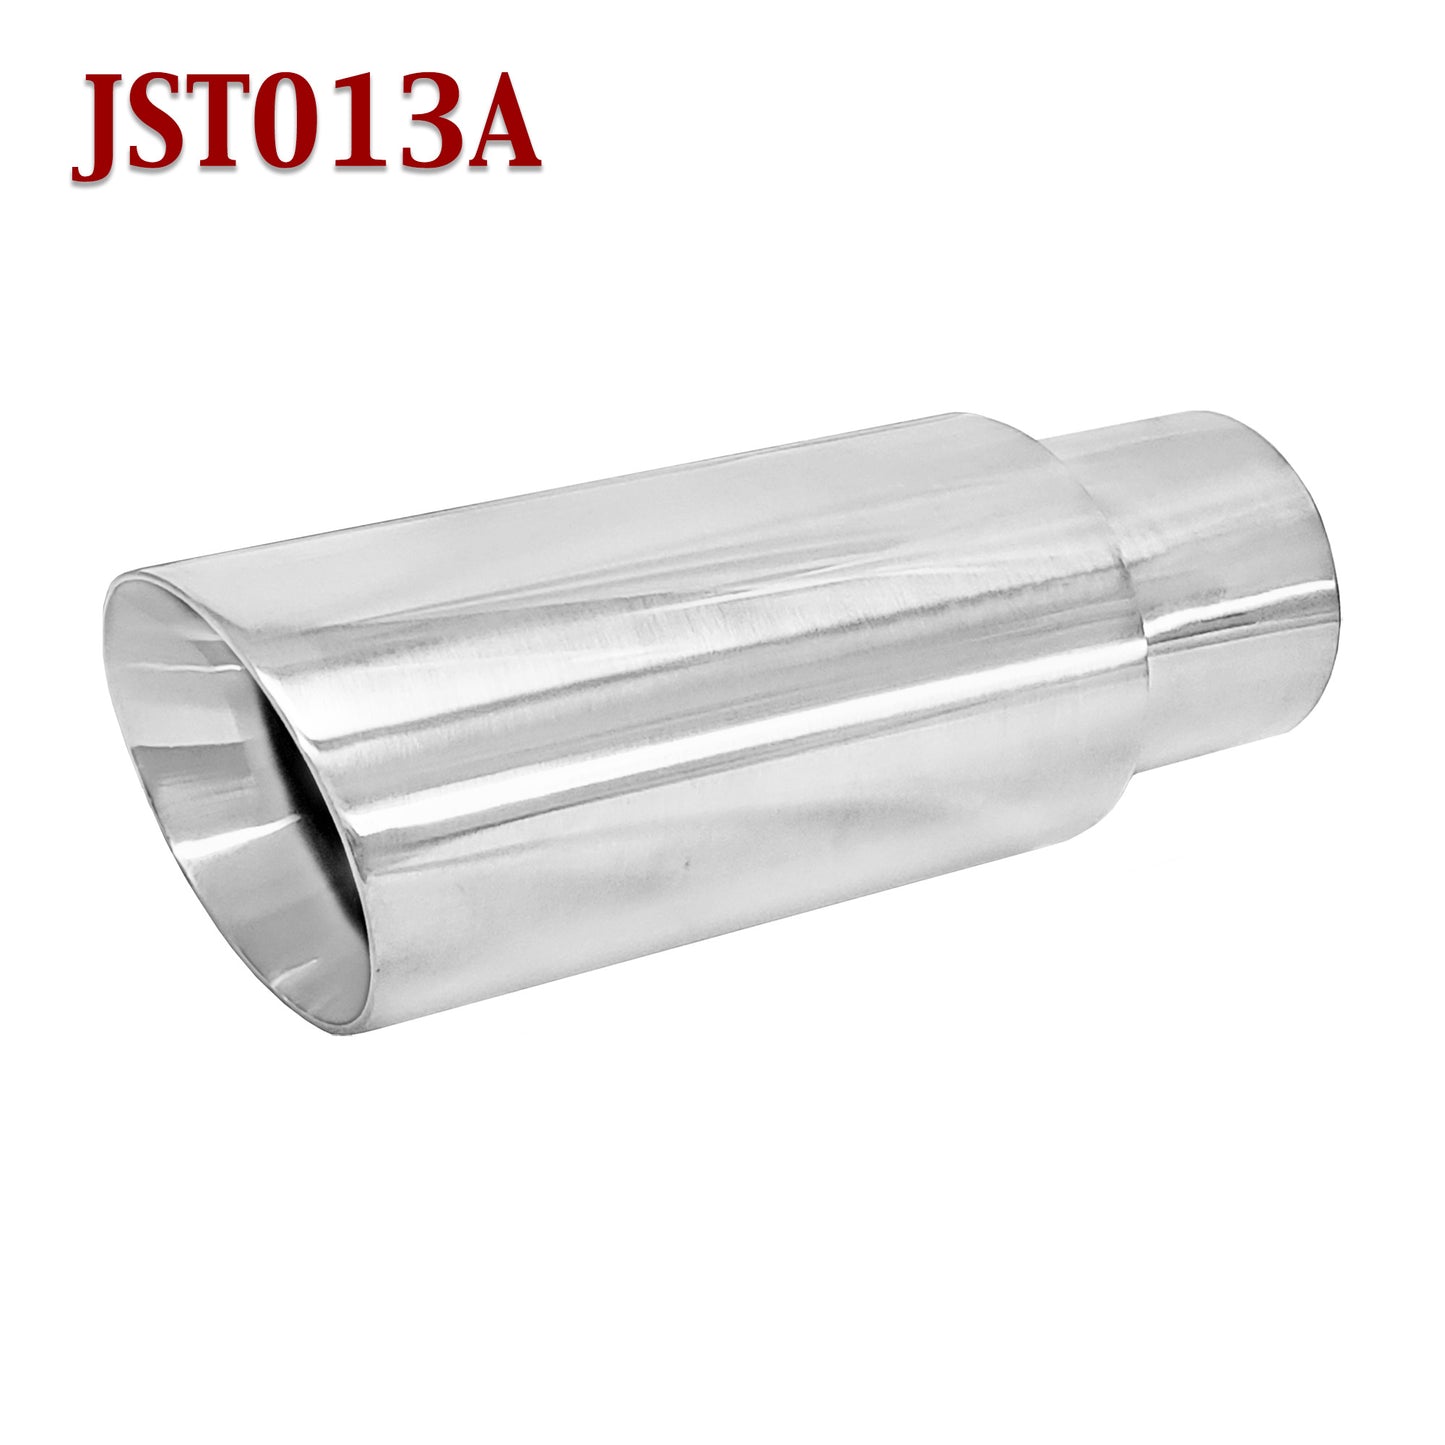 JST013A 2.25" Stainless Round Truck Exhaust Tip 2 1/4" Inlet / 3" Outlet / 8" Long